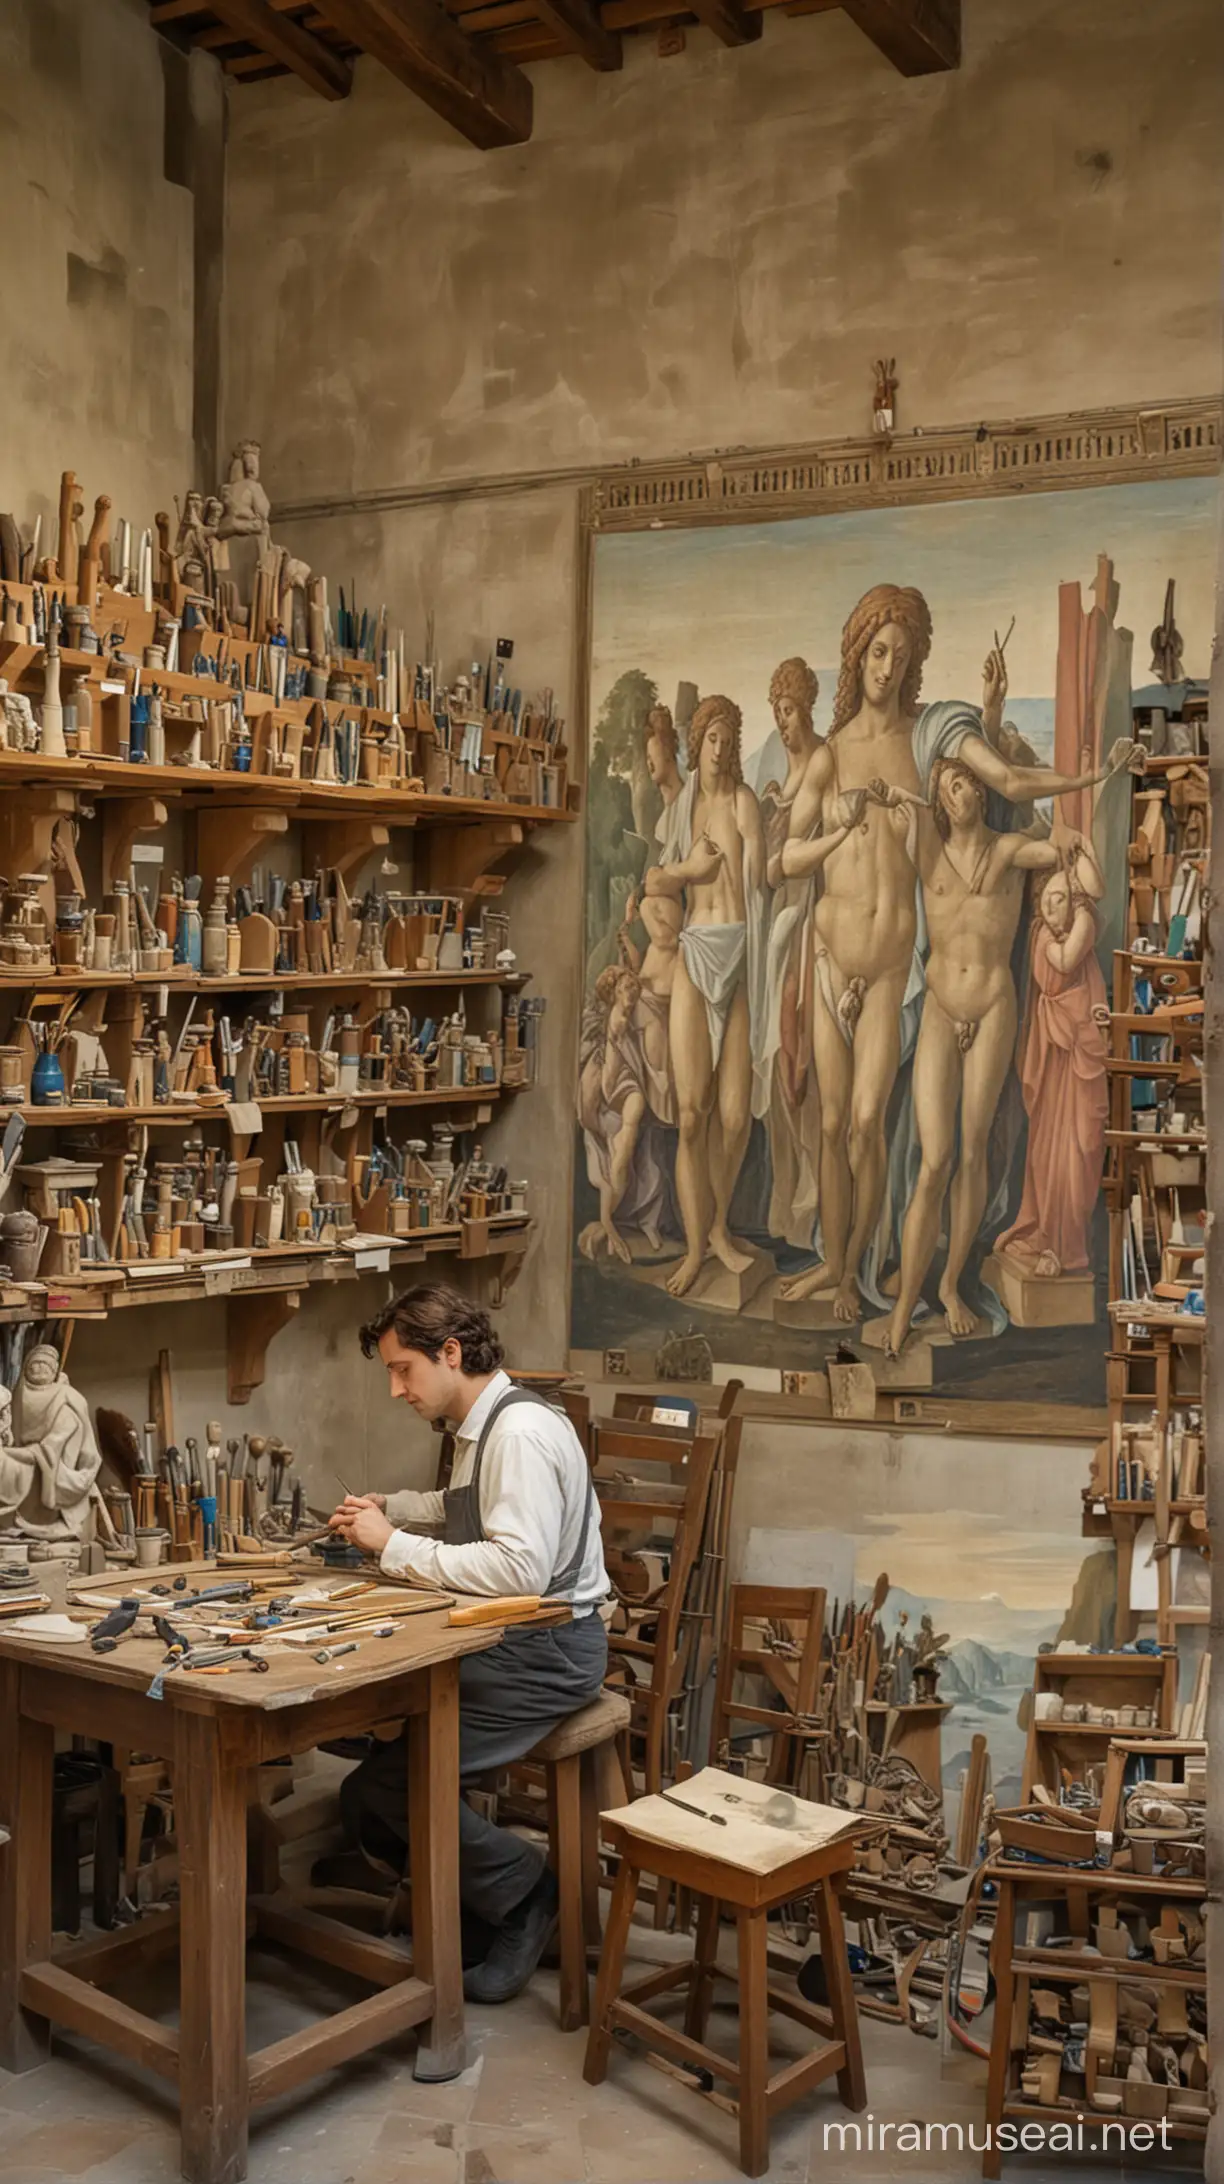 "Leonardo's Workshop": Leonardo is seen concentrating on a painting in Verrocchio's workshop. In the room, other apprentices also work alongside their masters on sculptures and paintings. The walls of the workshop adorned with artworks of the era and shelves filled with various tools and materials.

